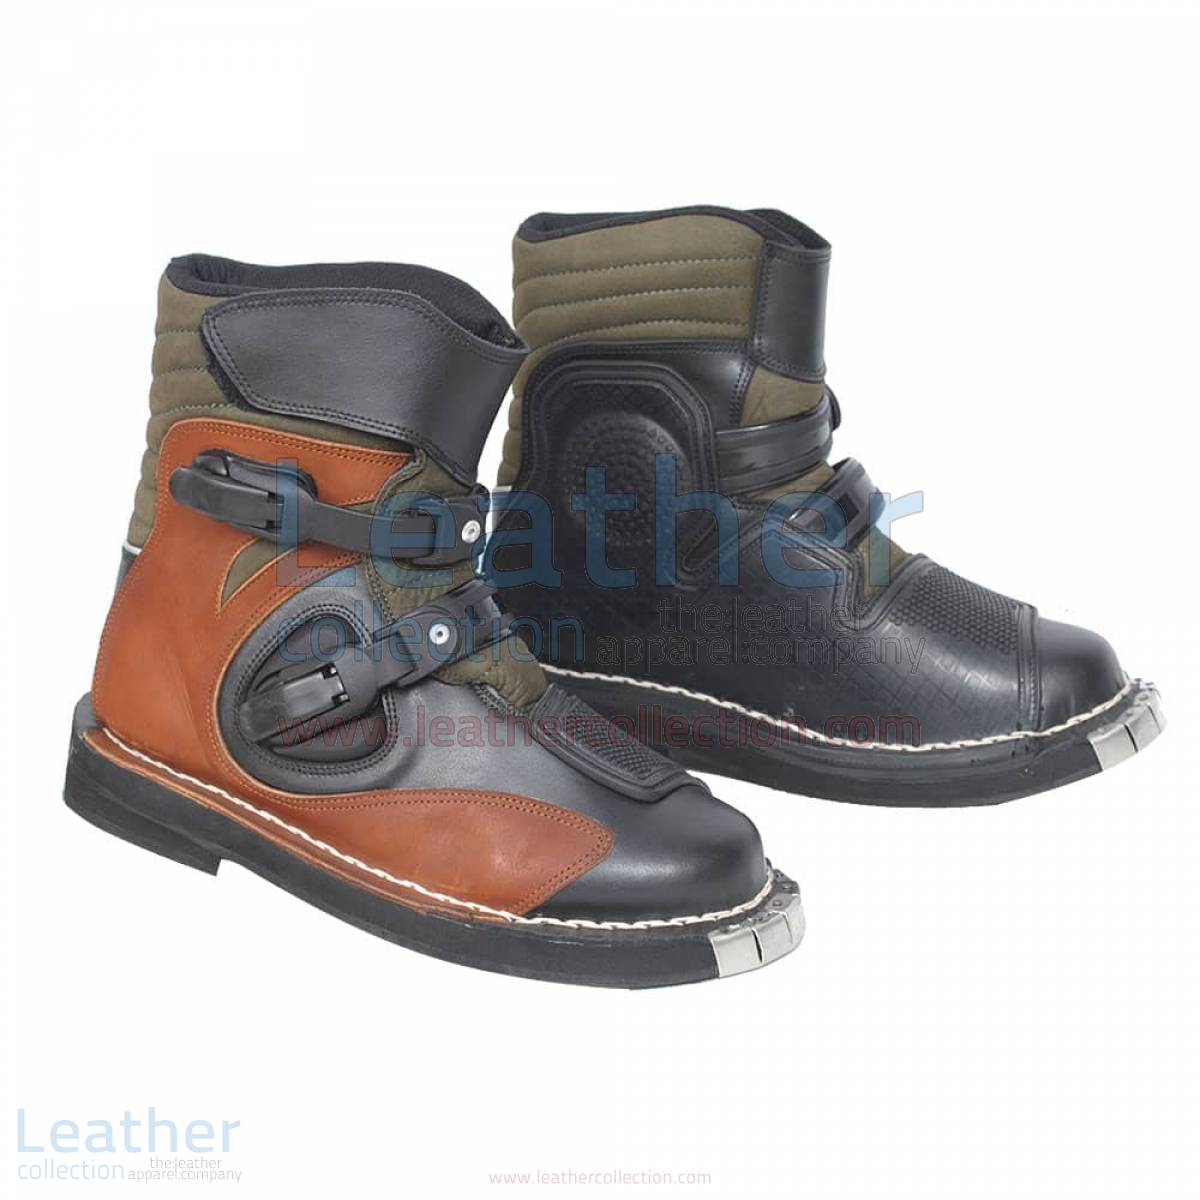 Bandit Motorcycle Riding Boots